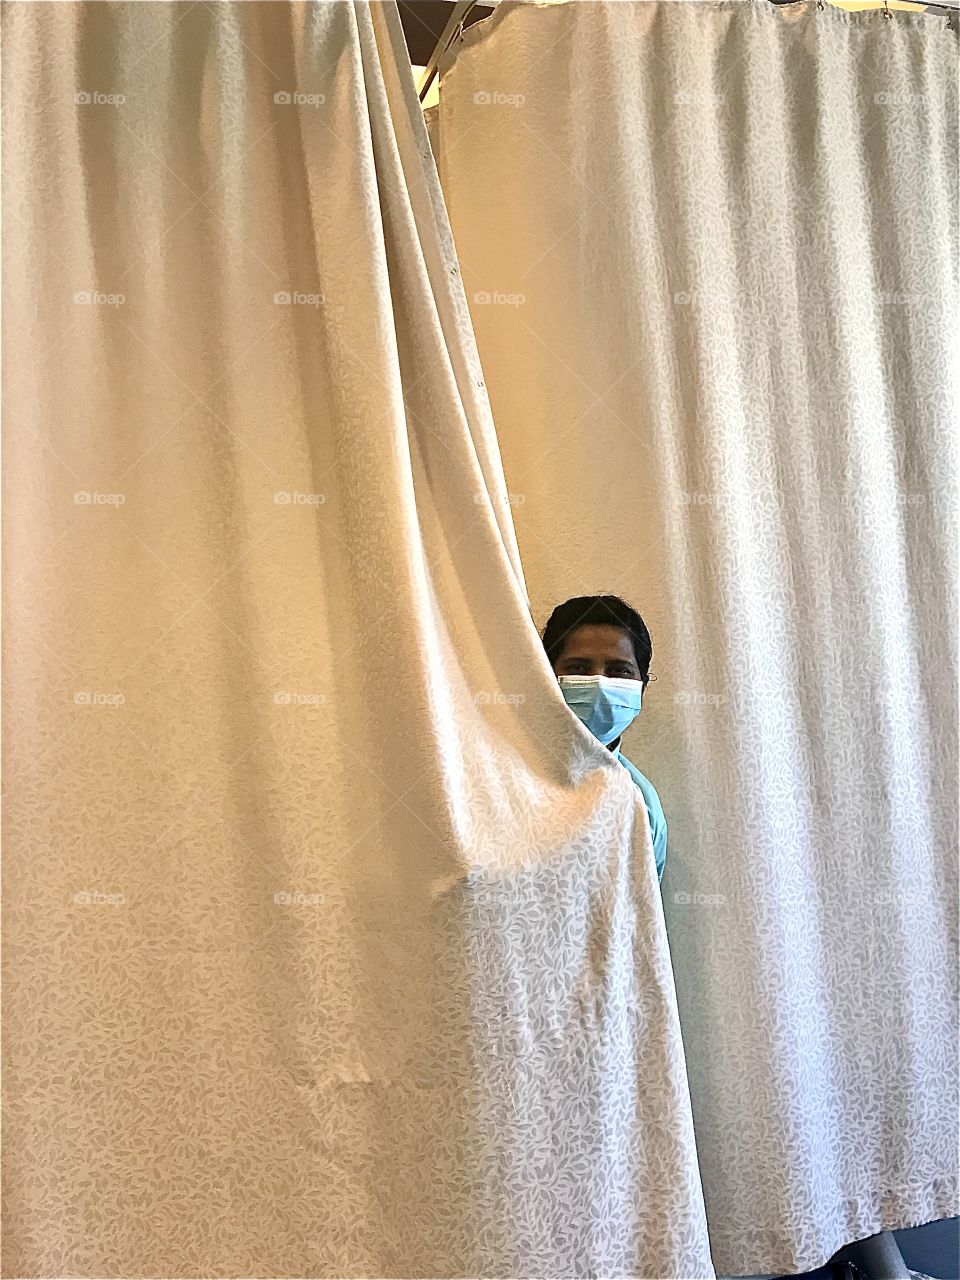 Masked person behind the curtain